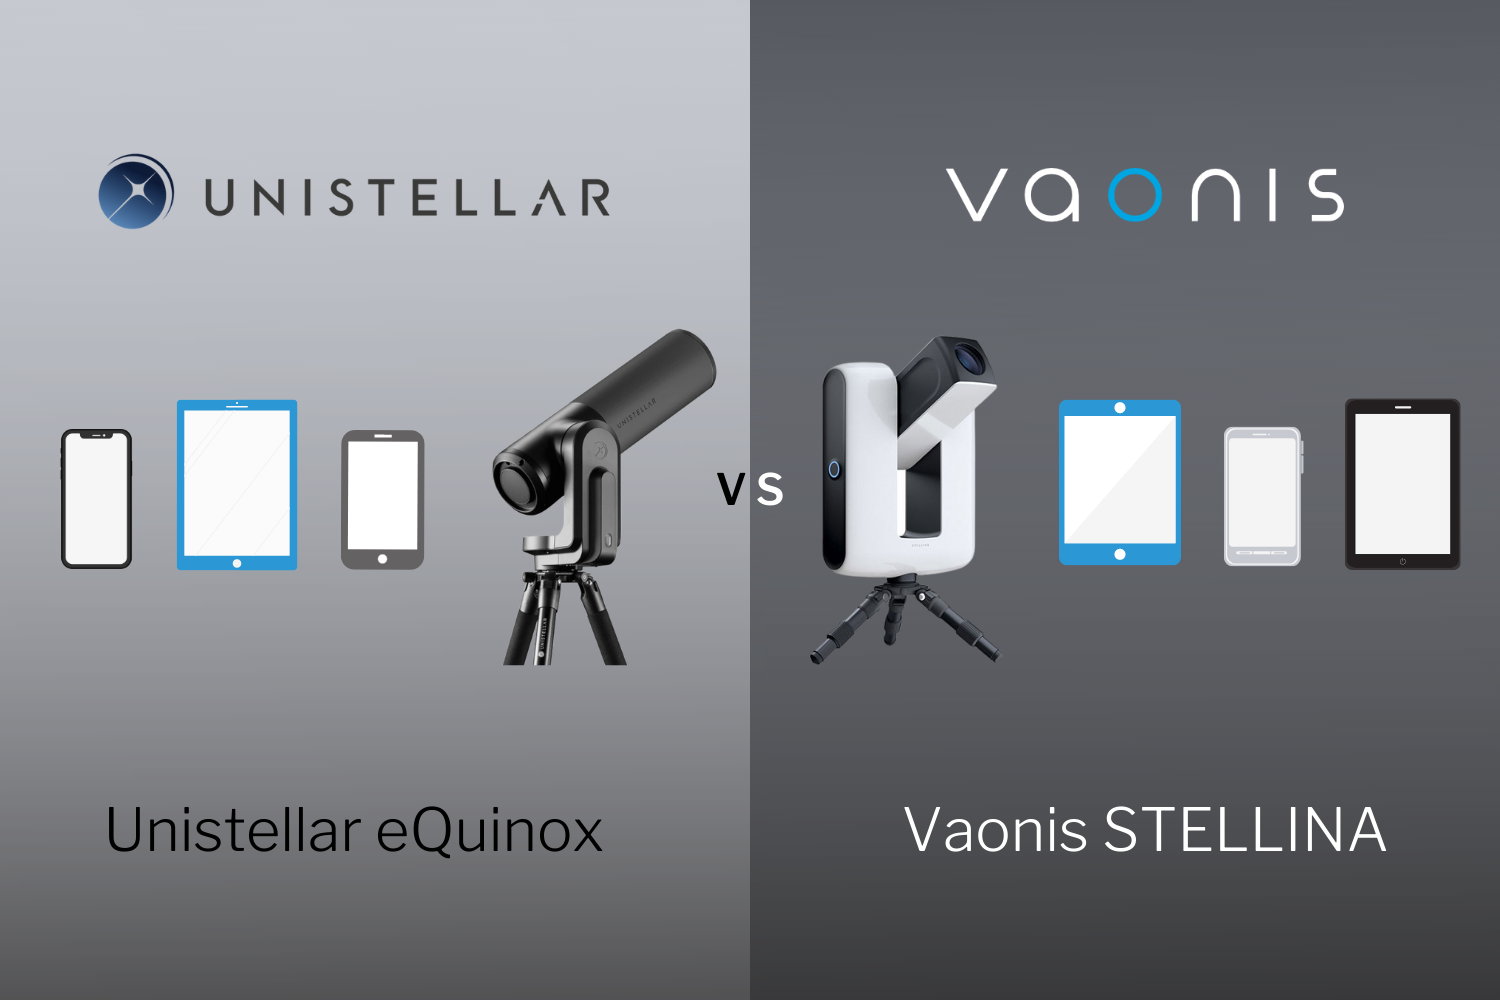 Unistellar eQuinox vs STELLINA by Vaonis: The Future of Astrophotography